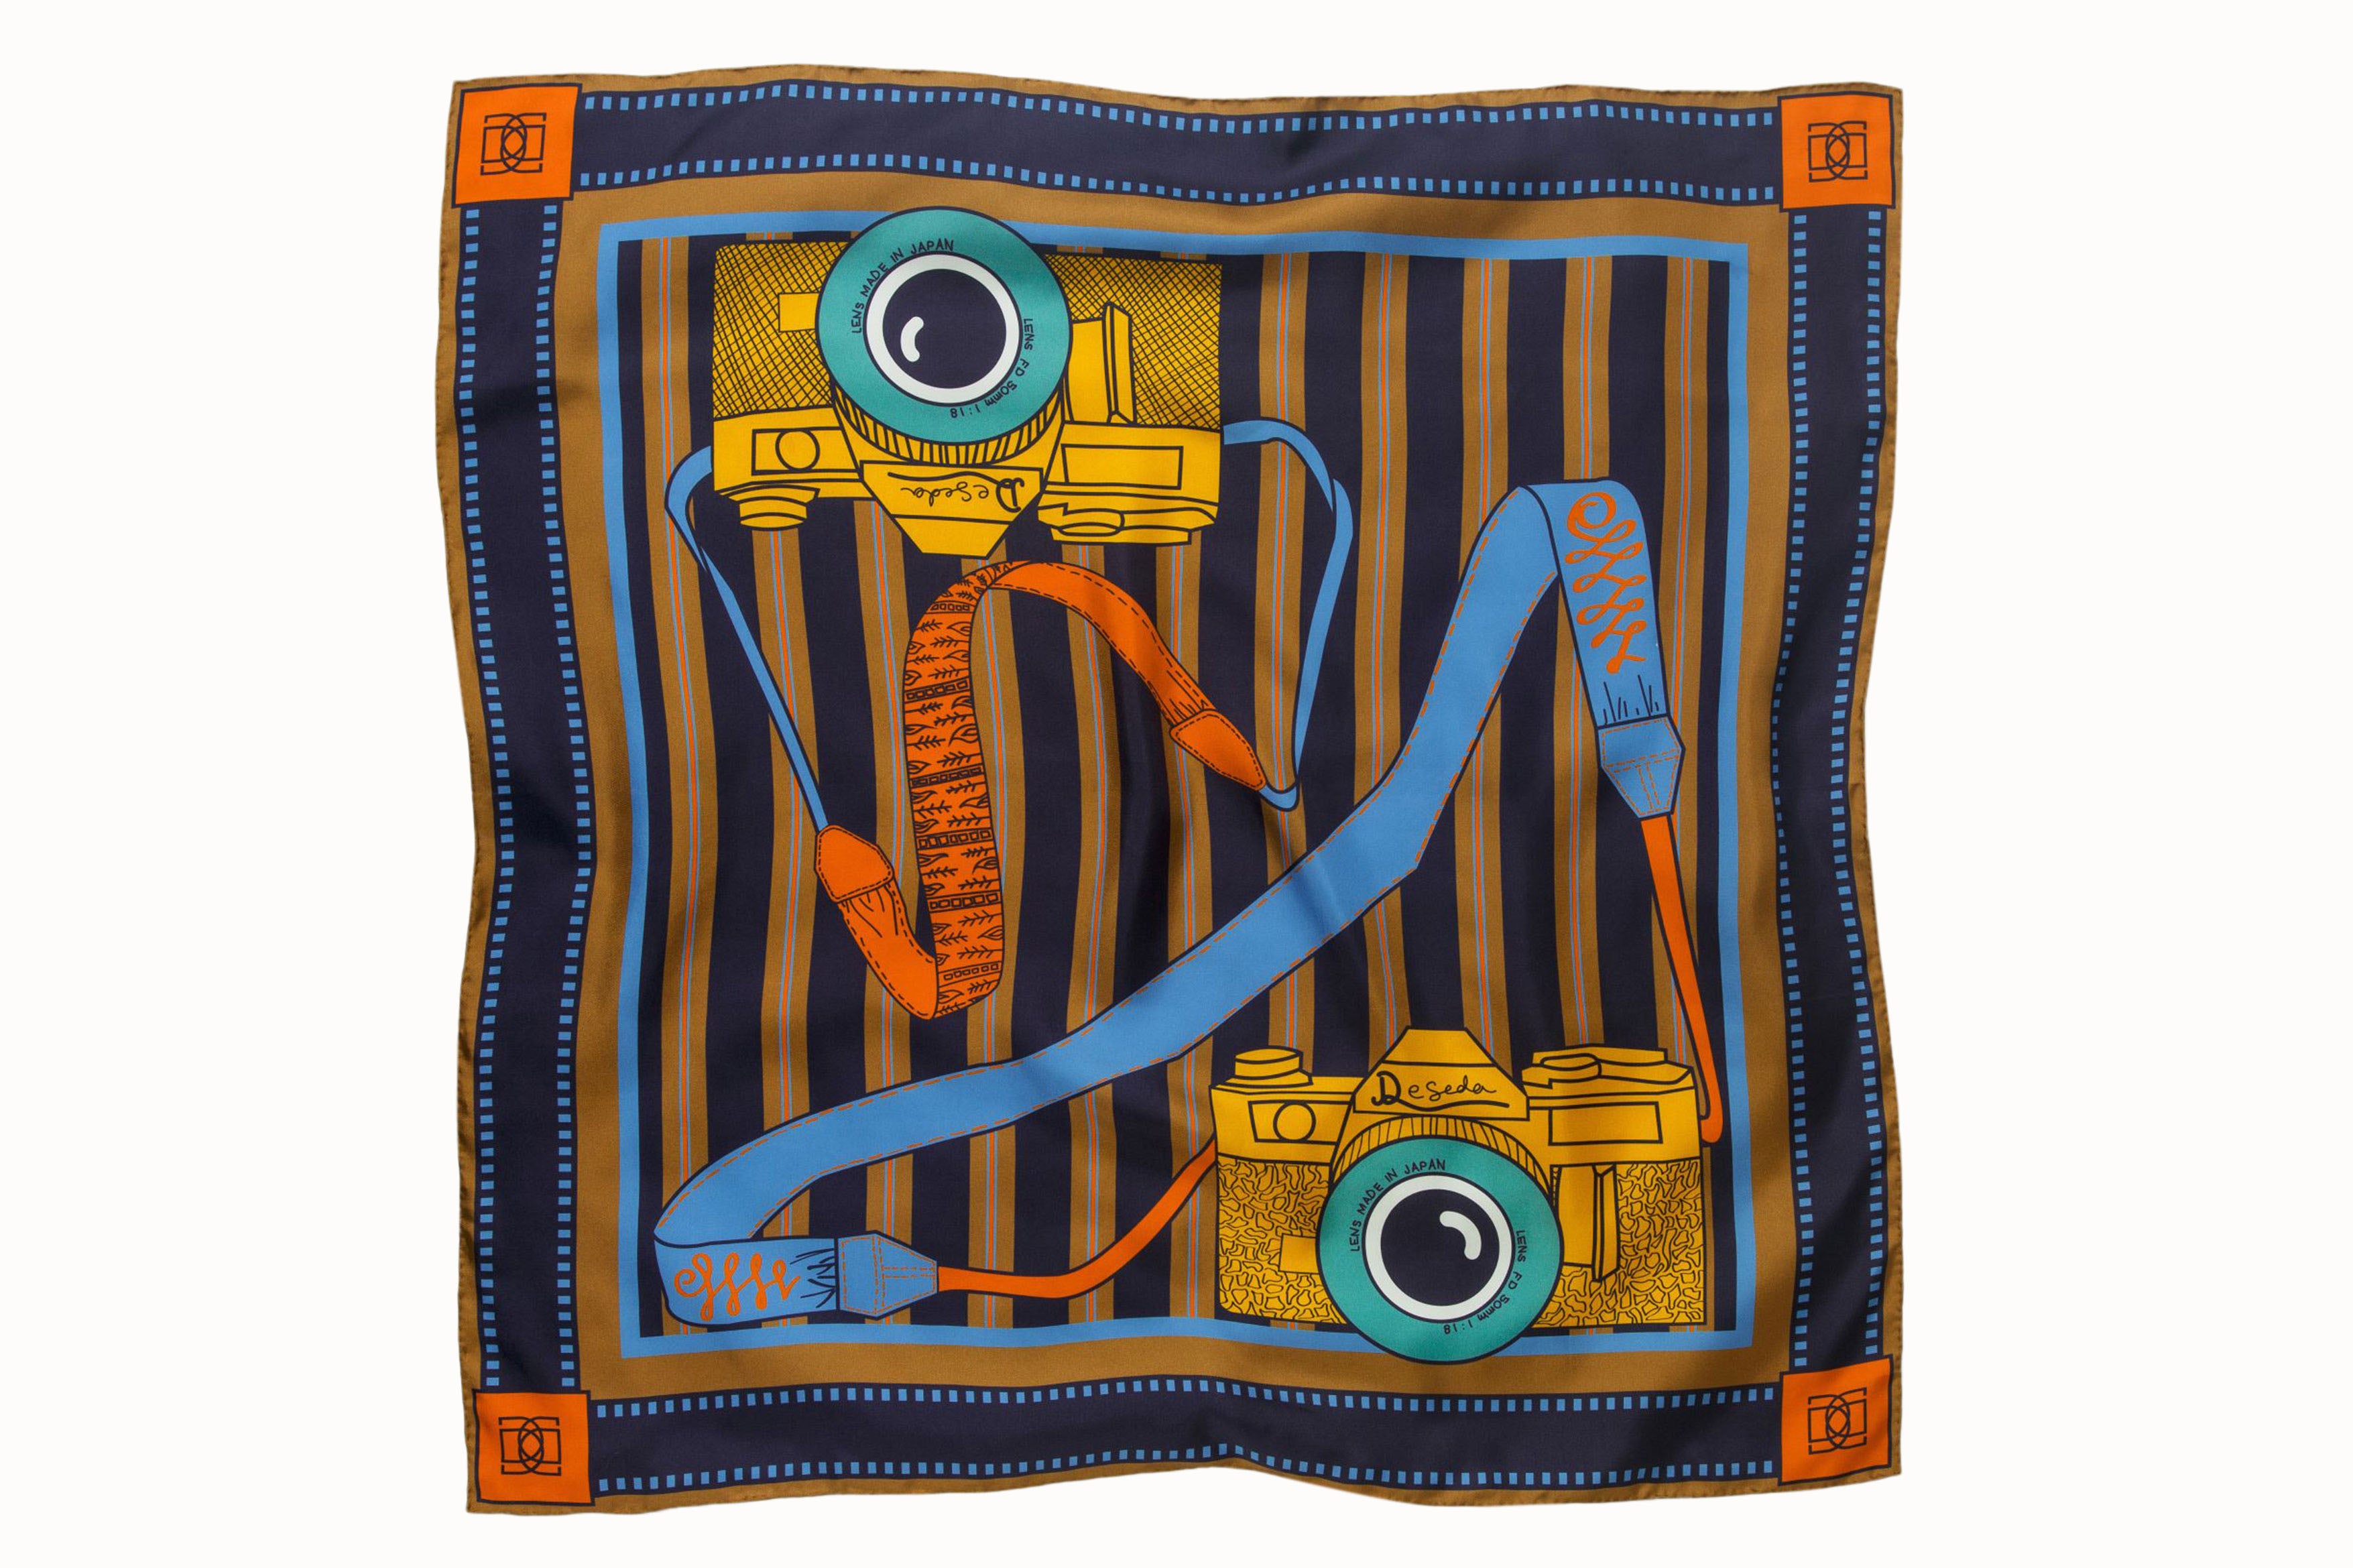 Flatlah image of 100% silk square scarf featuring a motif of two large-scale illustrated film cameras and their straps splashed on top of a multi-color striped background. Blue film-inspired border around scarf. Design features colors such as orange, navy, camel, maize and a touch of aqua.